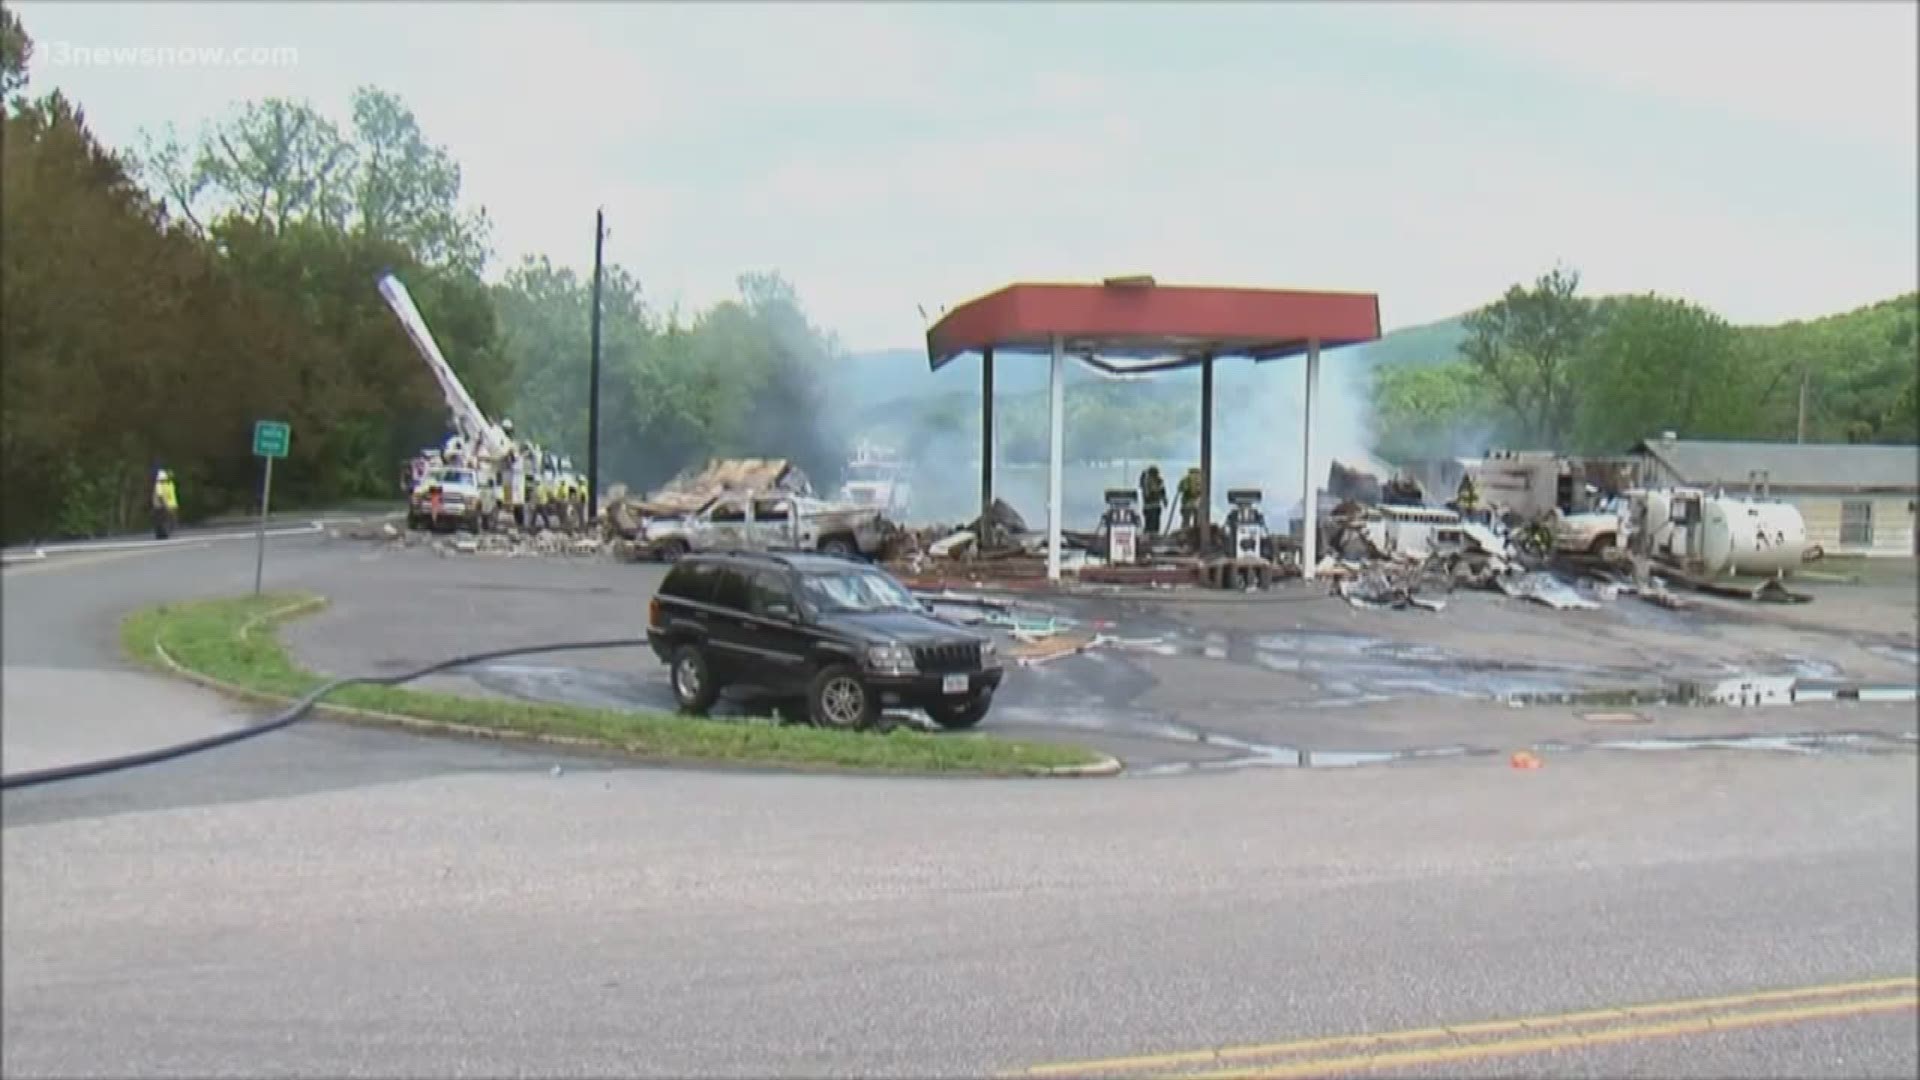 Several people are missing after the explosion at a gas station in Buena Vista near Roanoke.